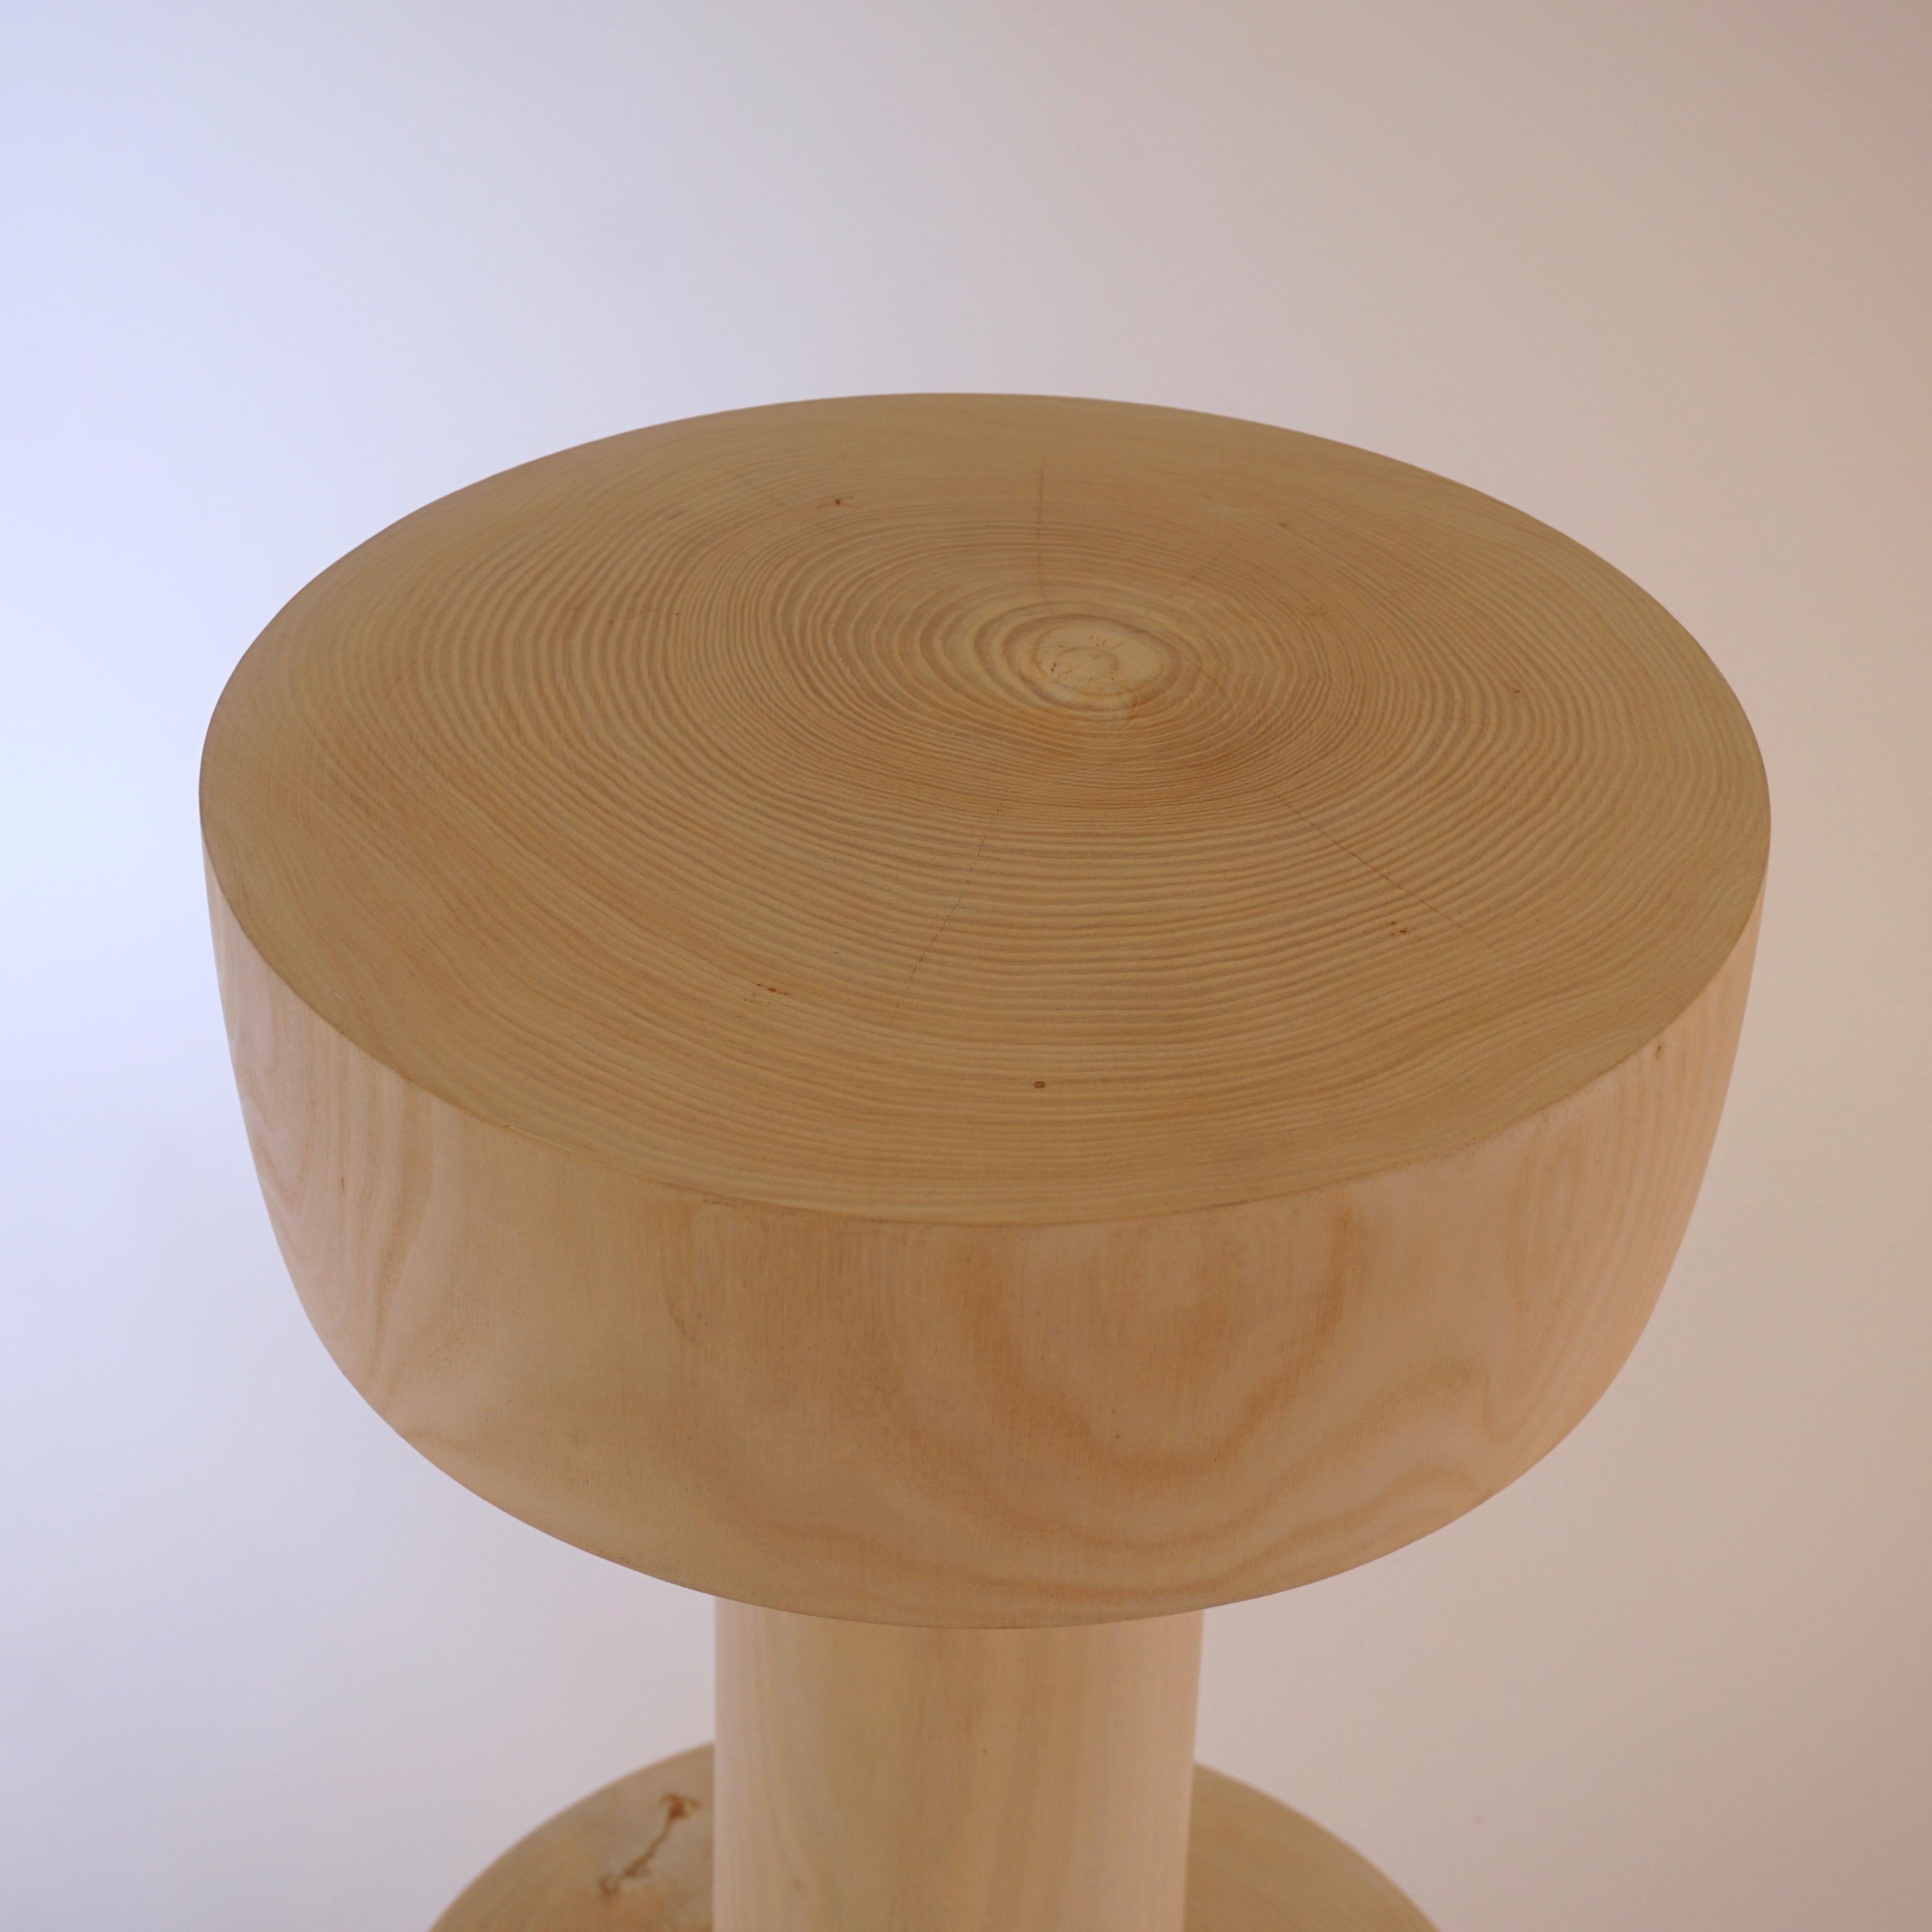 American Turned Wooden Pedestal #14 in Bleached Catalpa For Sale